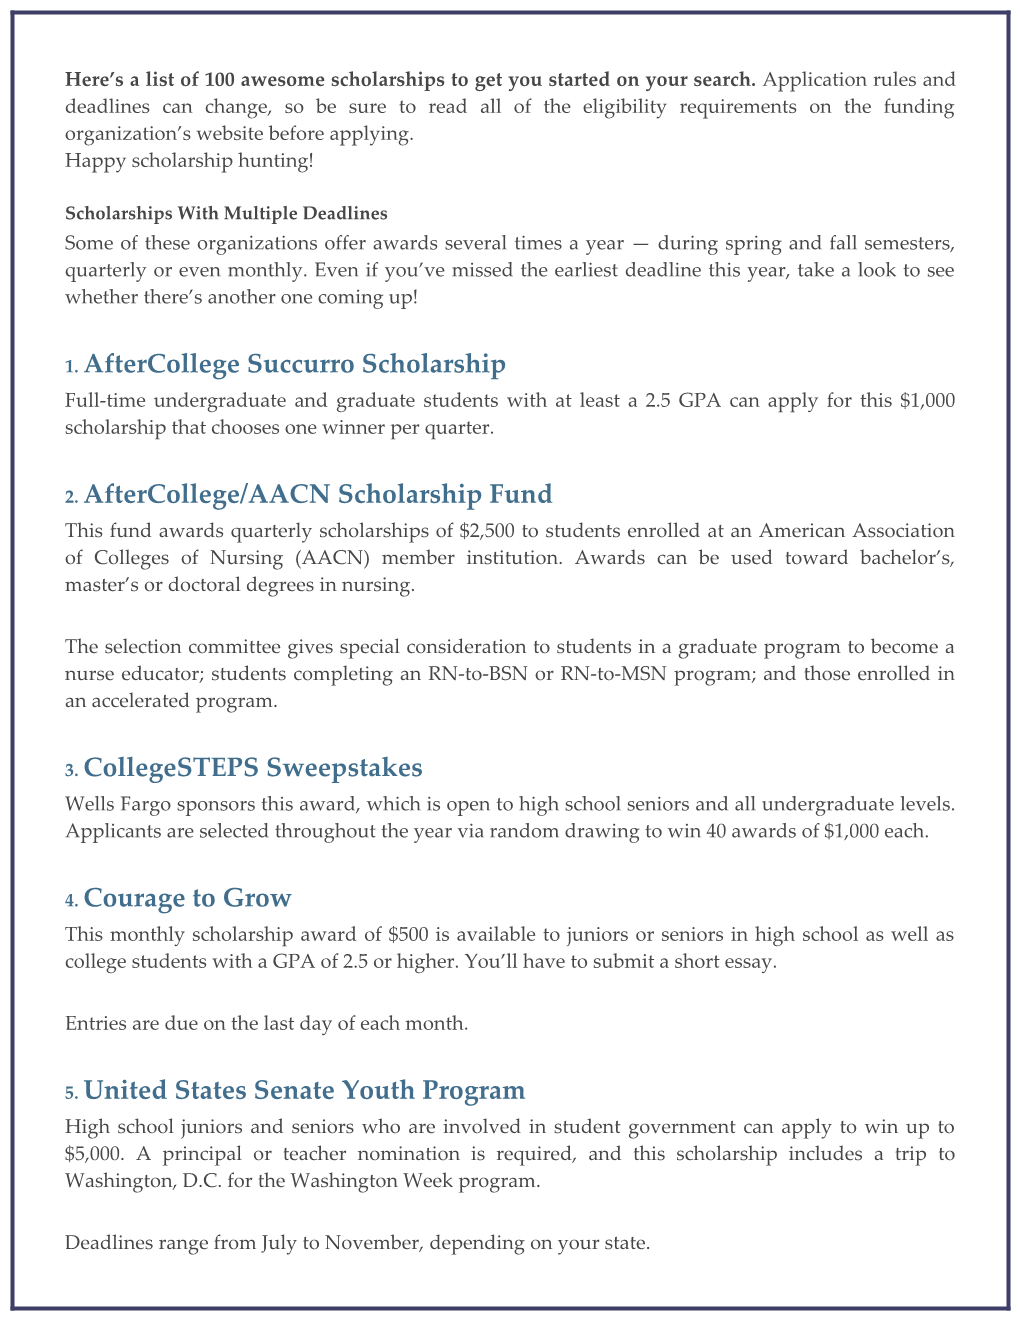 Scholarships with Multiple Deadlines